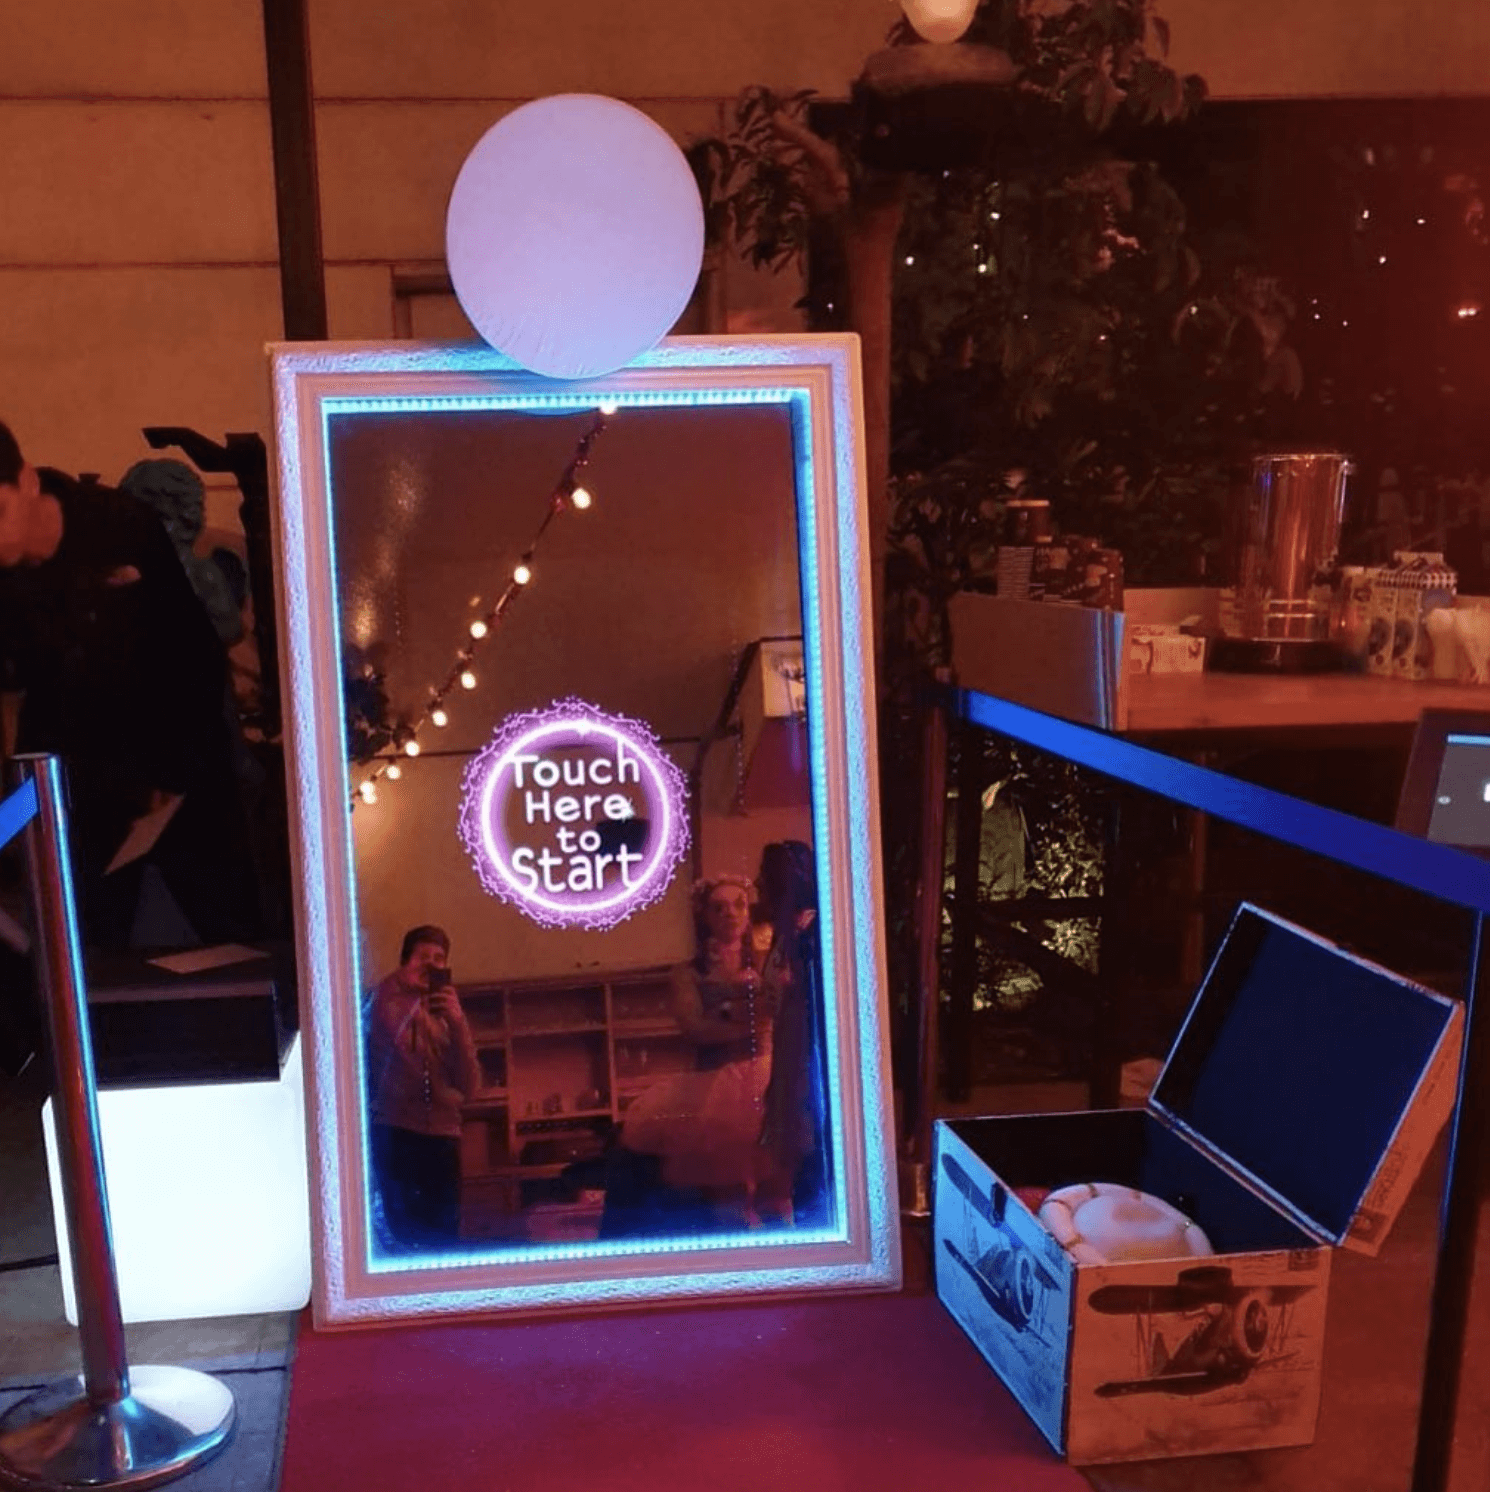 Tall rectangular photo booth in the style of a mirror. A wedding monogram is lit up in the center.